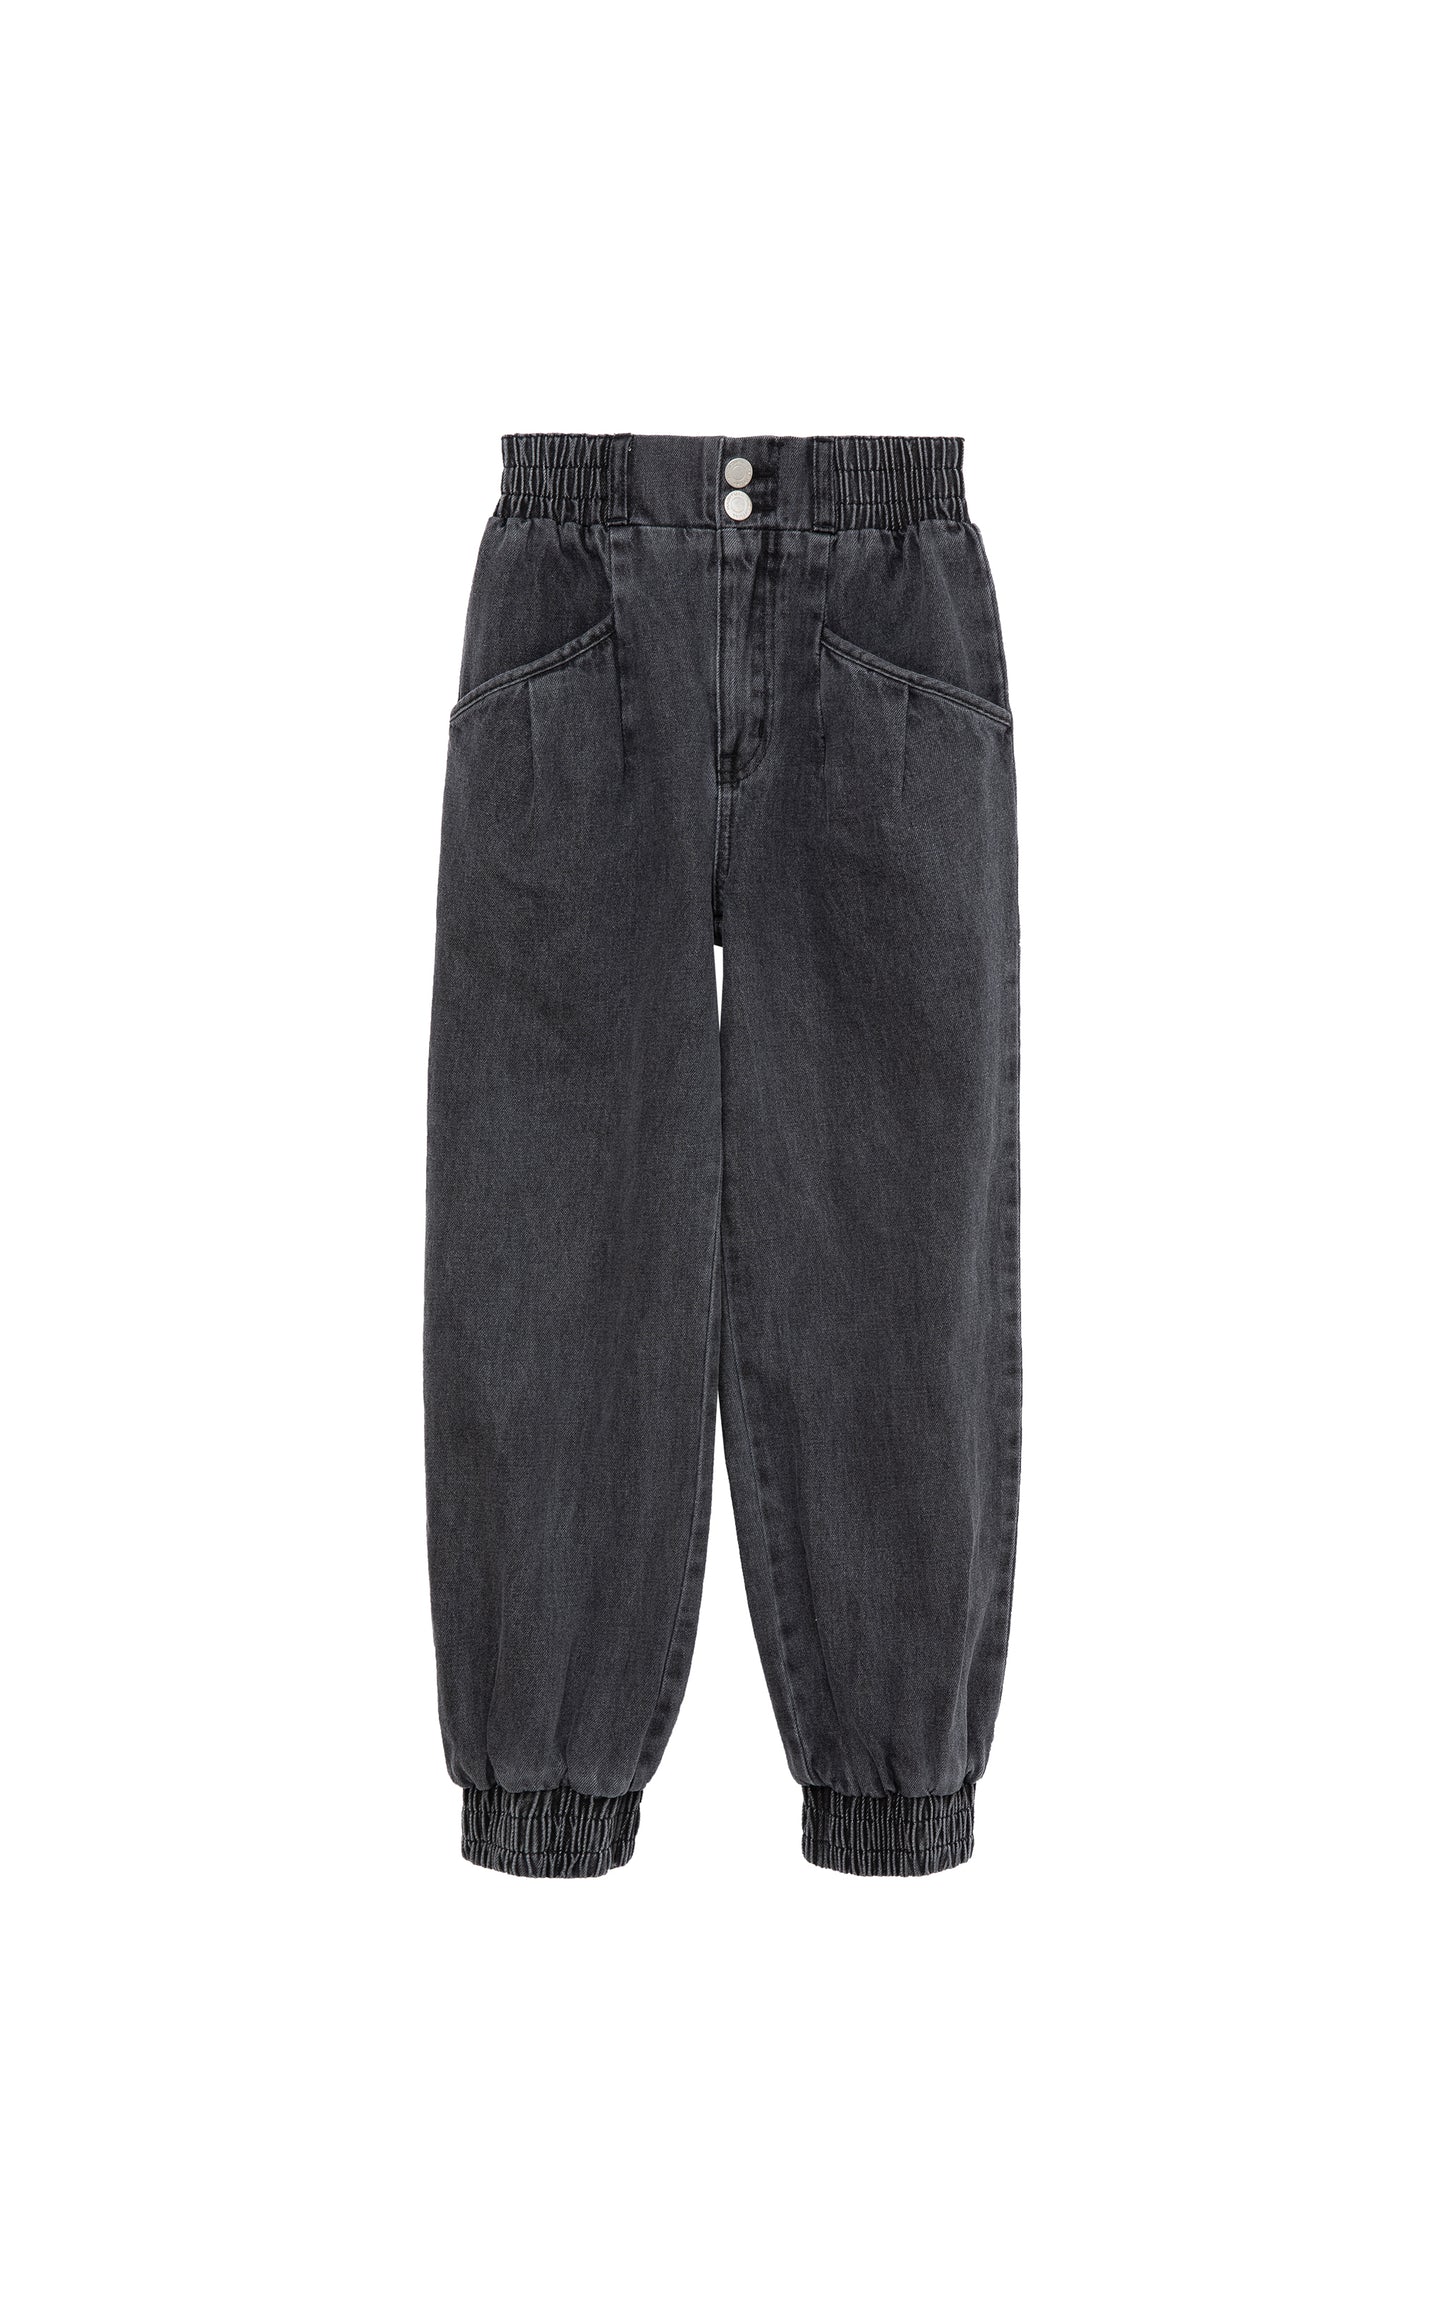 WASHED OUT BLACK DENIM PANTS WITH RUCHED ELASTIC WAISTBAND AND CUFFED ANKLES